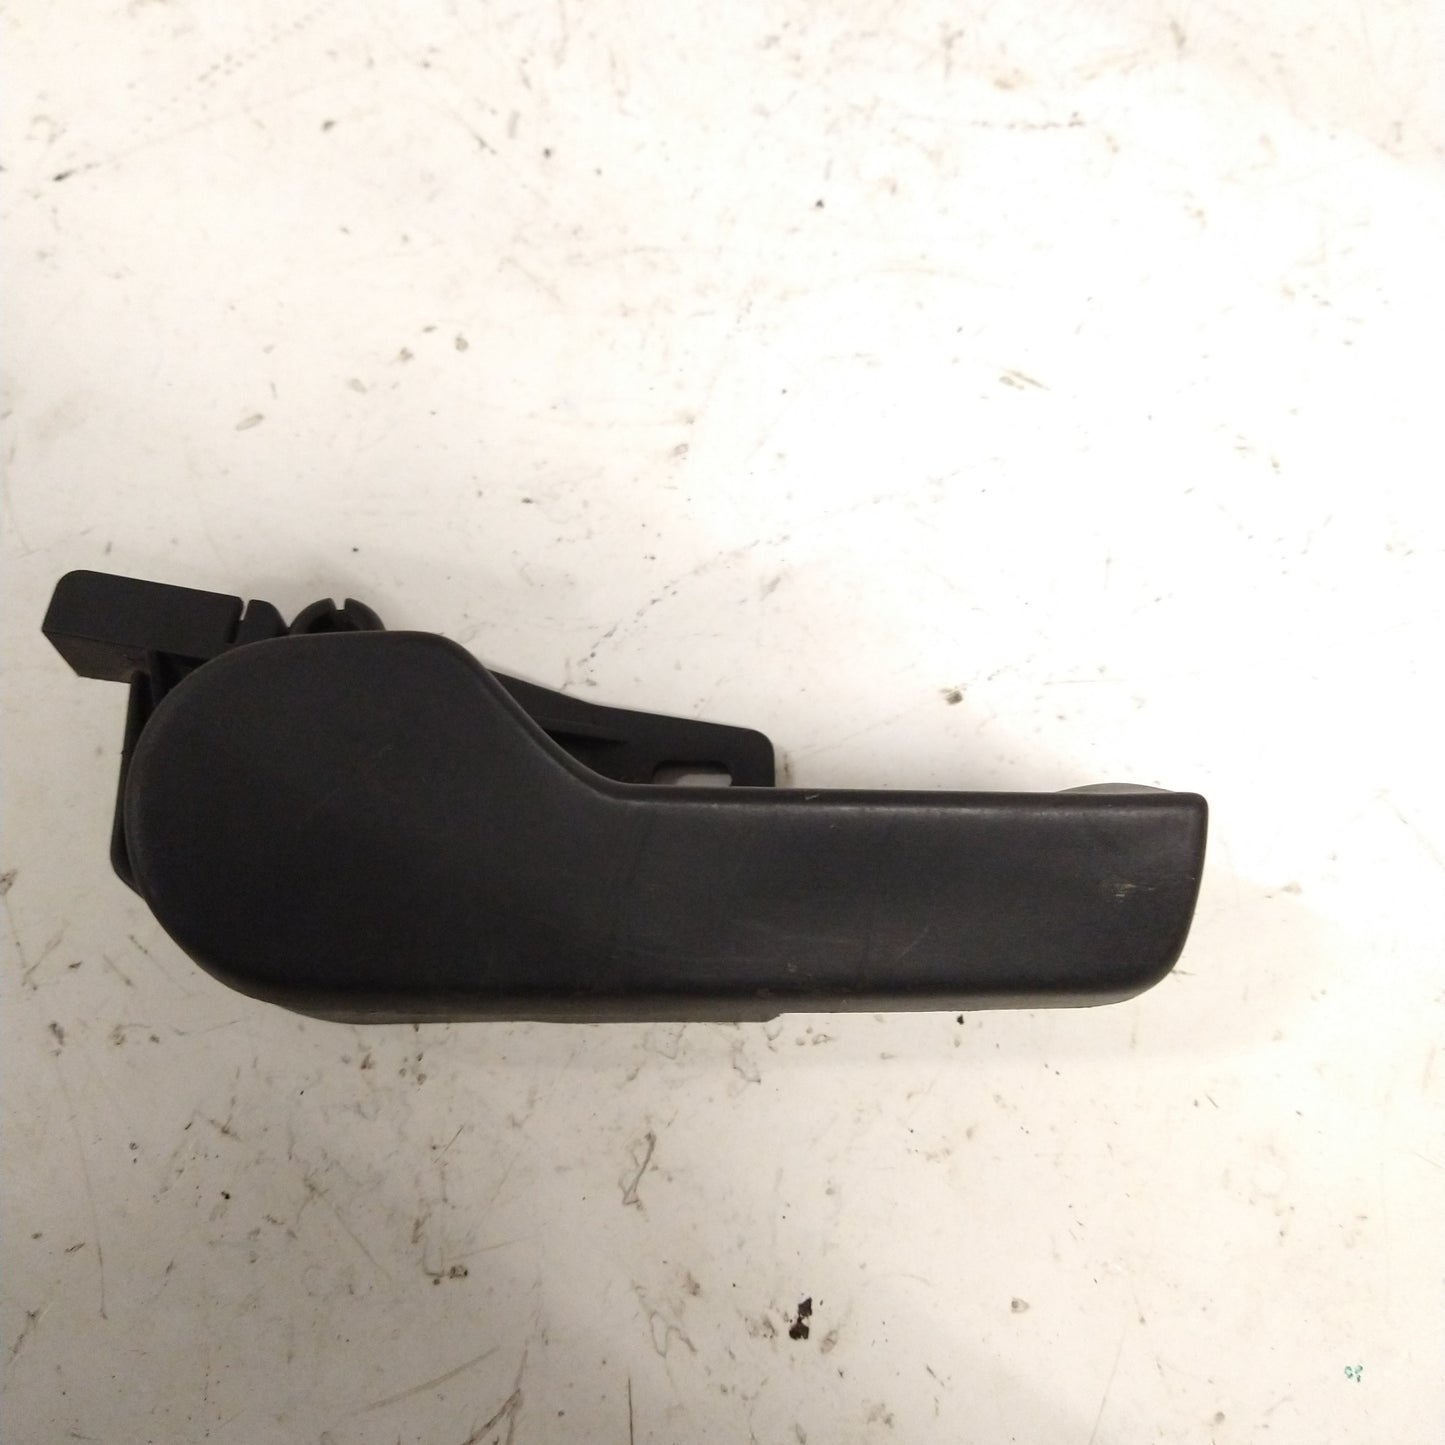 MK4 Interior Hood Release Handle And Backing Plate